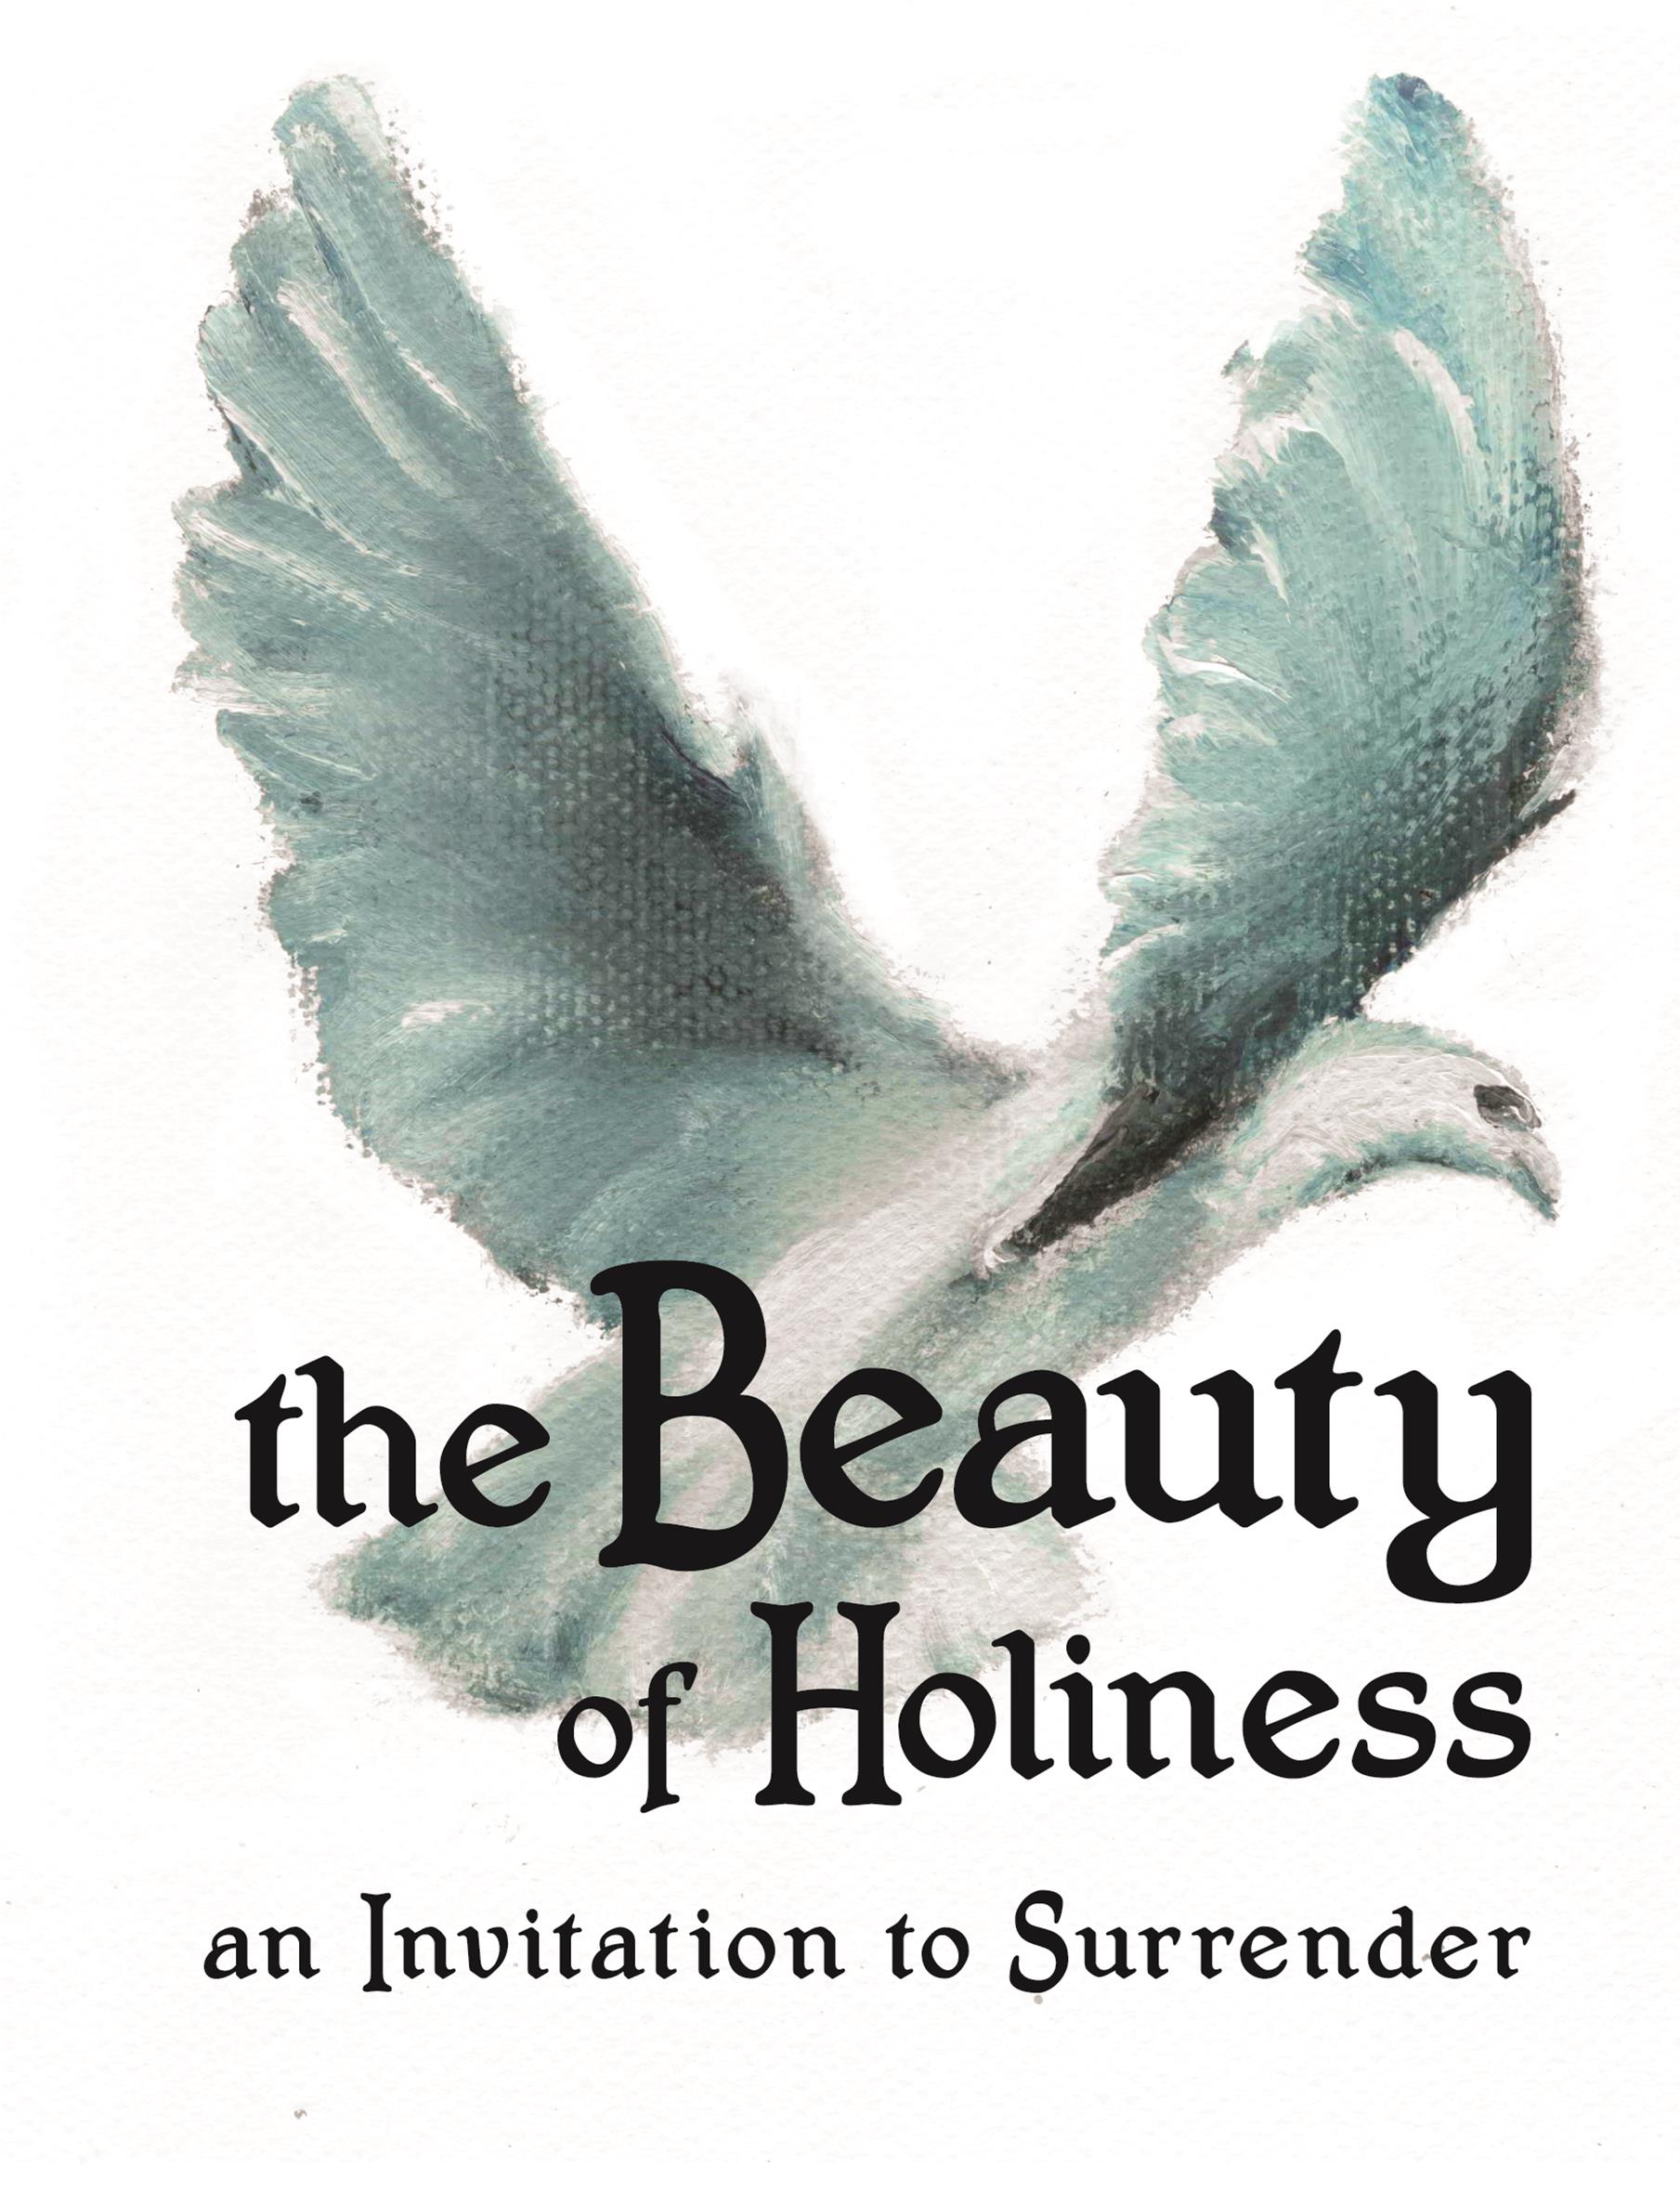 Thr beauty of Holiness front cover (image of dove) 